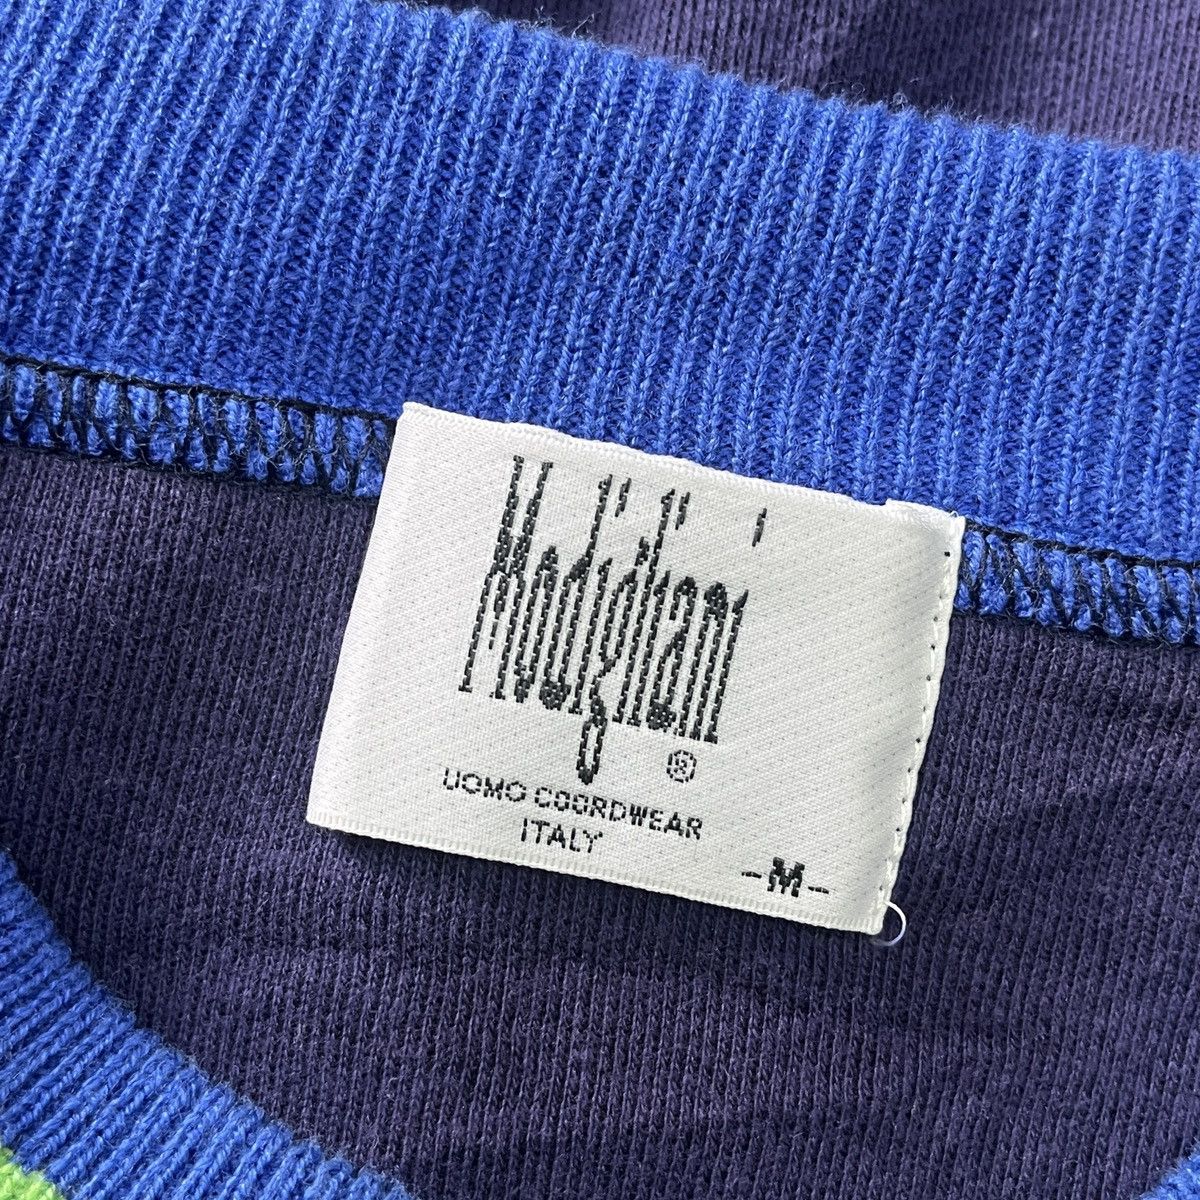 Vintage Modigliani Sweater Made In Italy - 5